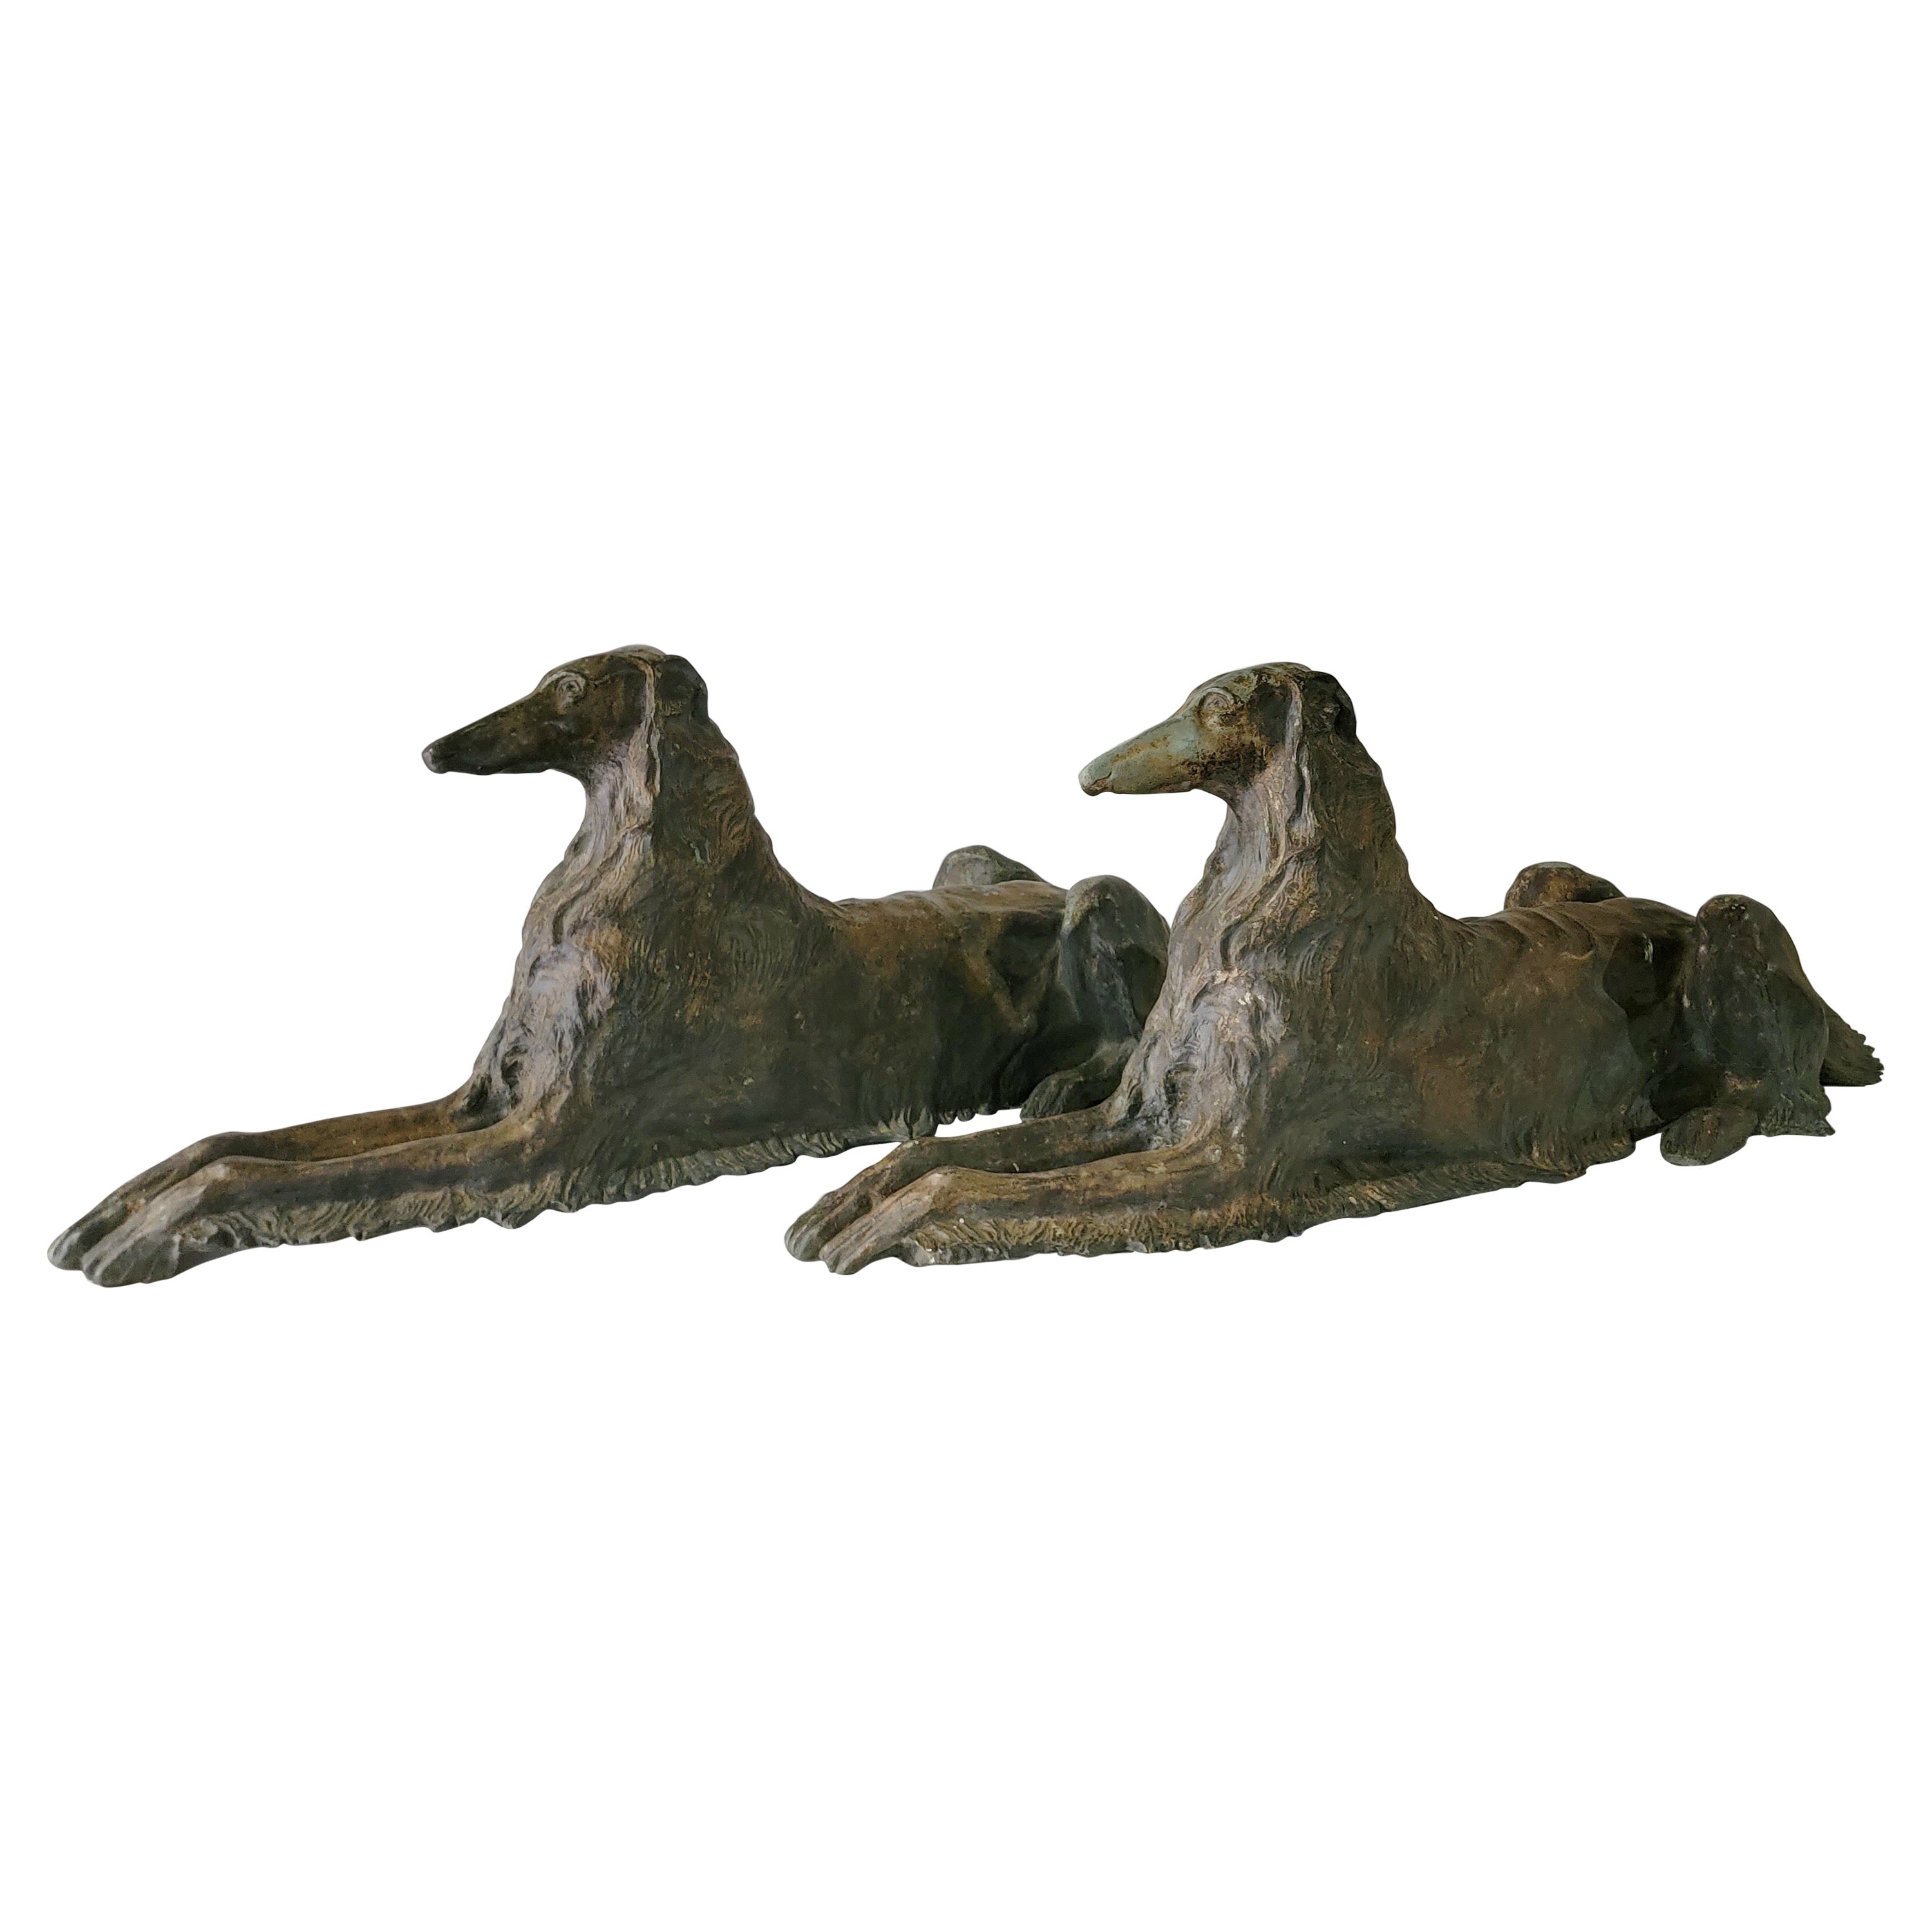 Early 20th-C. Life-Size Recumbent Patinated Bronze Borzoi Dogs, Mirrored Pair